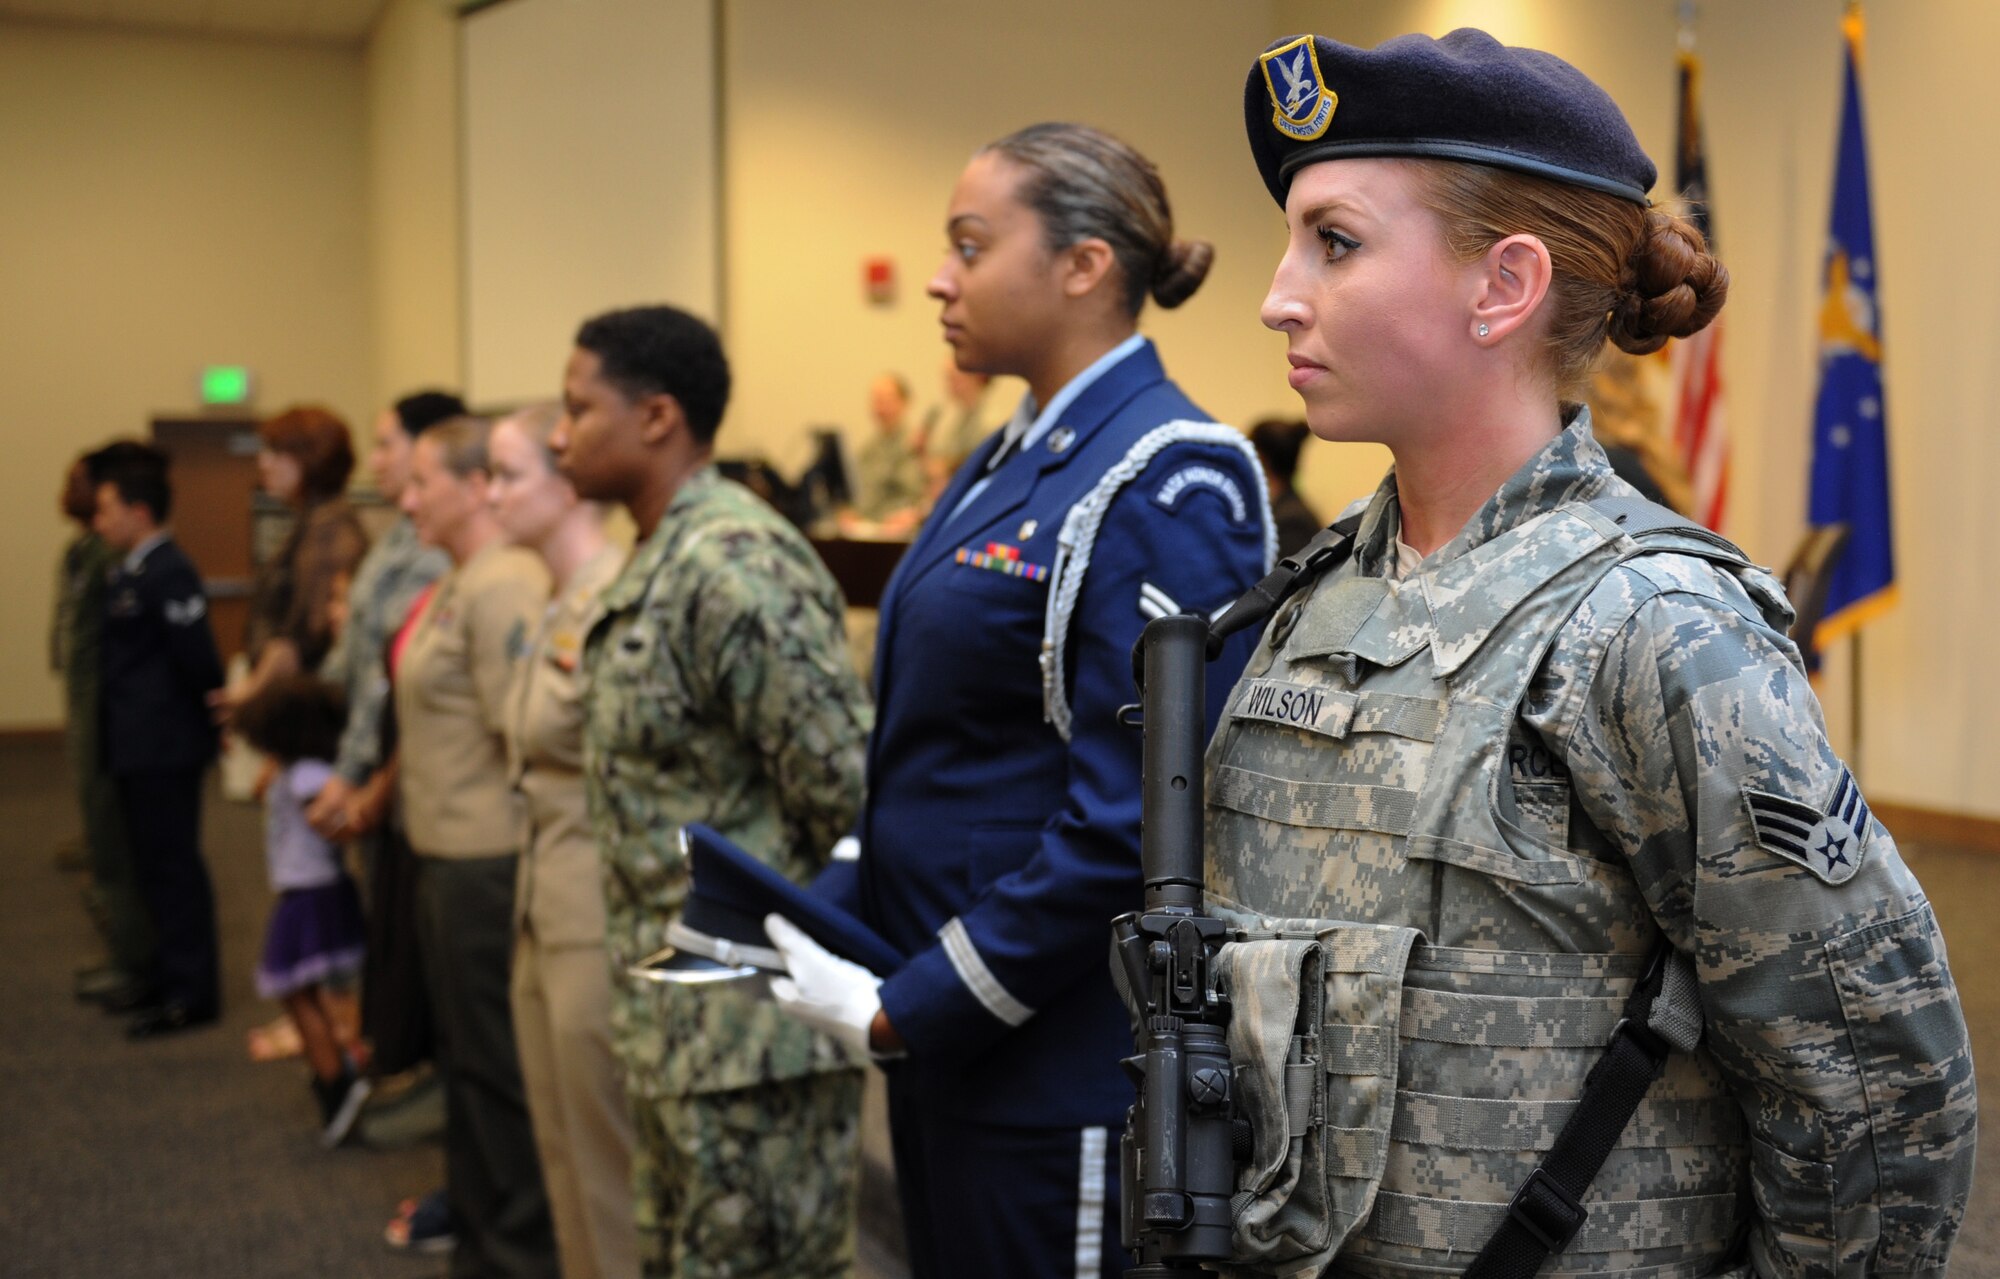 Senior Airman Catherine Wilson, 81st Security Forces Squadron electronic security systems and Defense Biometric Identification System technician, stands among fellow service members during the National Women’s History Fair at the Roberts Consolidated Maintenance Facility Mar. 24, 2016, Keesler Air Force Base, Miss. The event was held in honor of National Women’s History Month.  Also included, were health and informational booths, a guest panel of accomplished women and a presentation honoring Keesler women of distinction. (U.S. Air Force photo by Kemberly Groue)